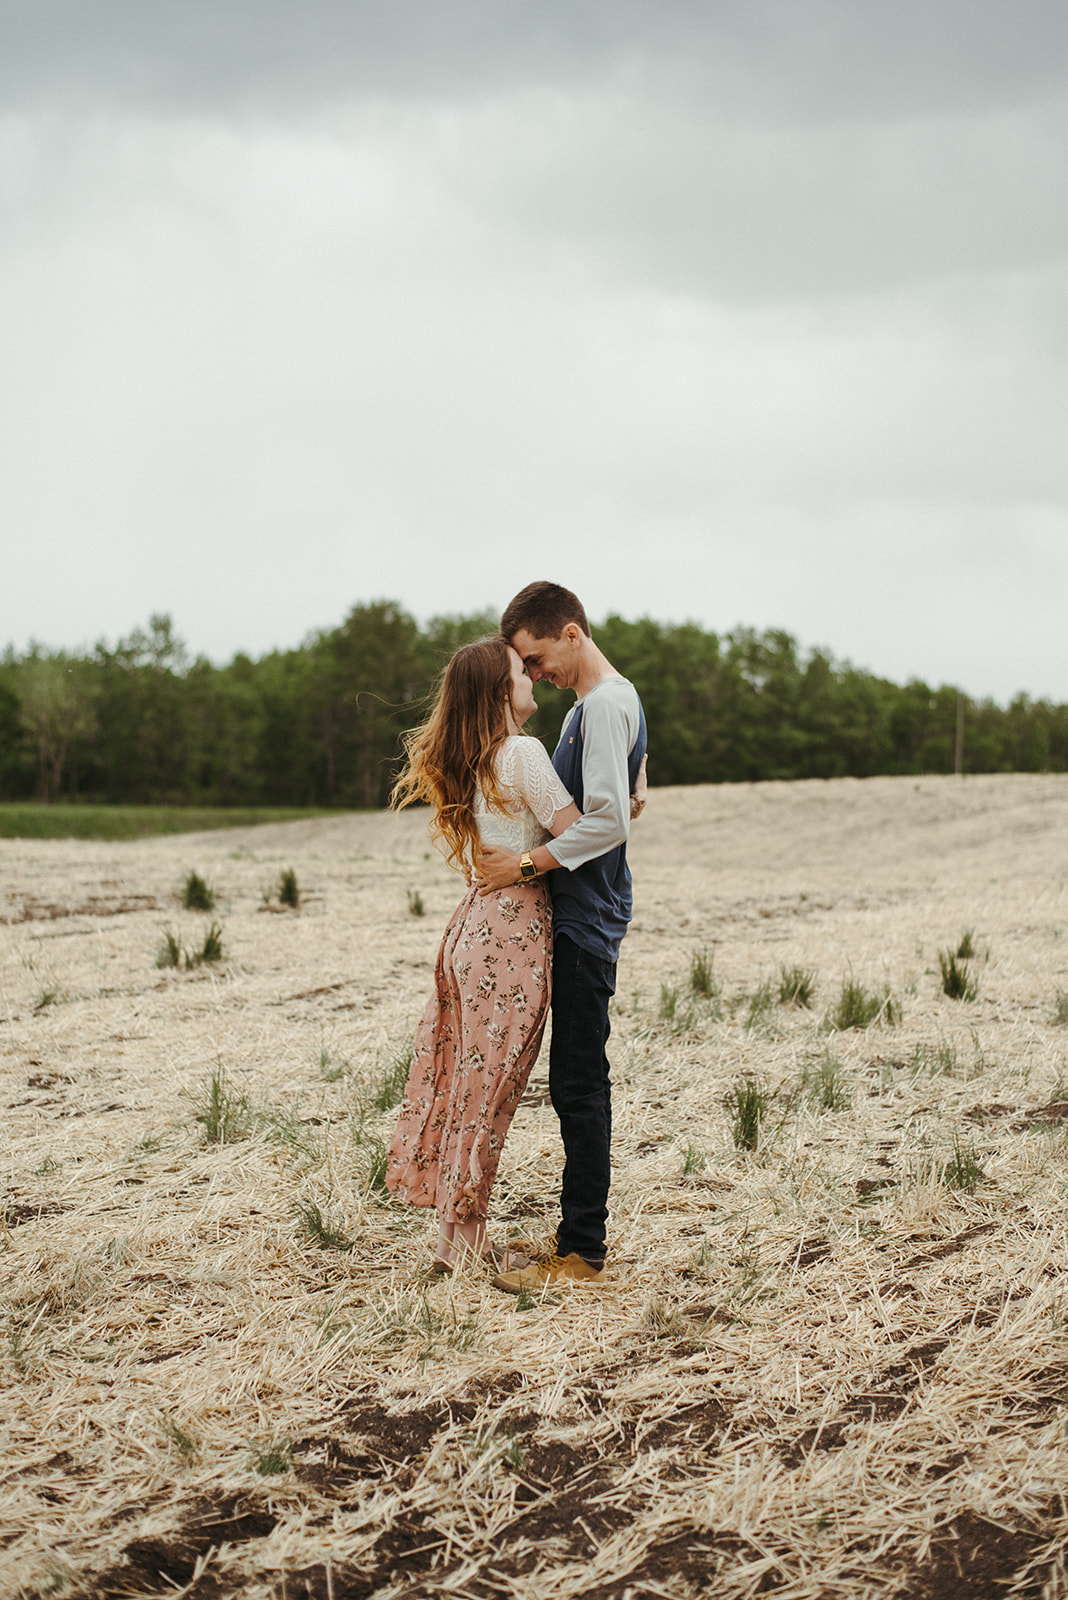 Engagement session outfit tips from professional photographer, Jessica Kaitlyn